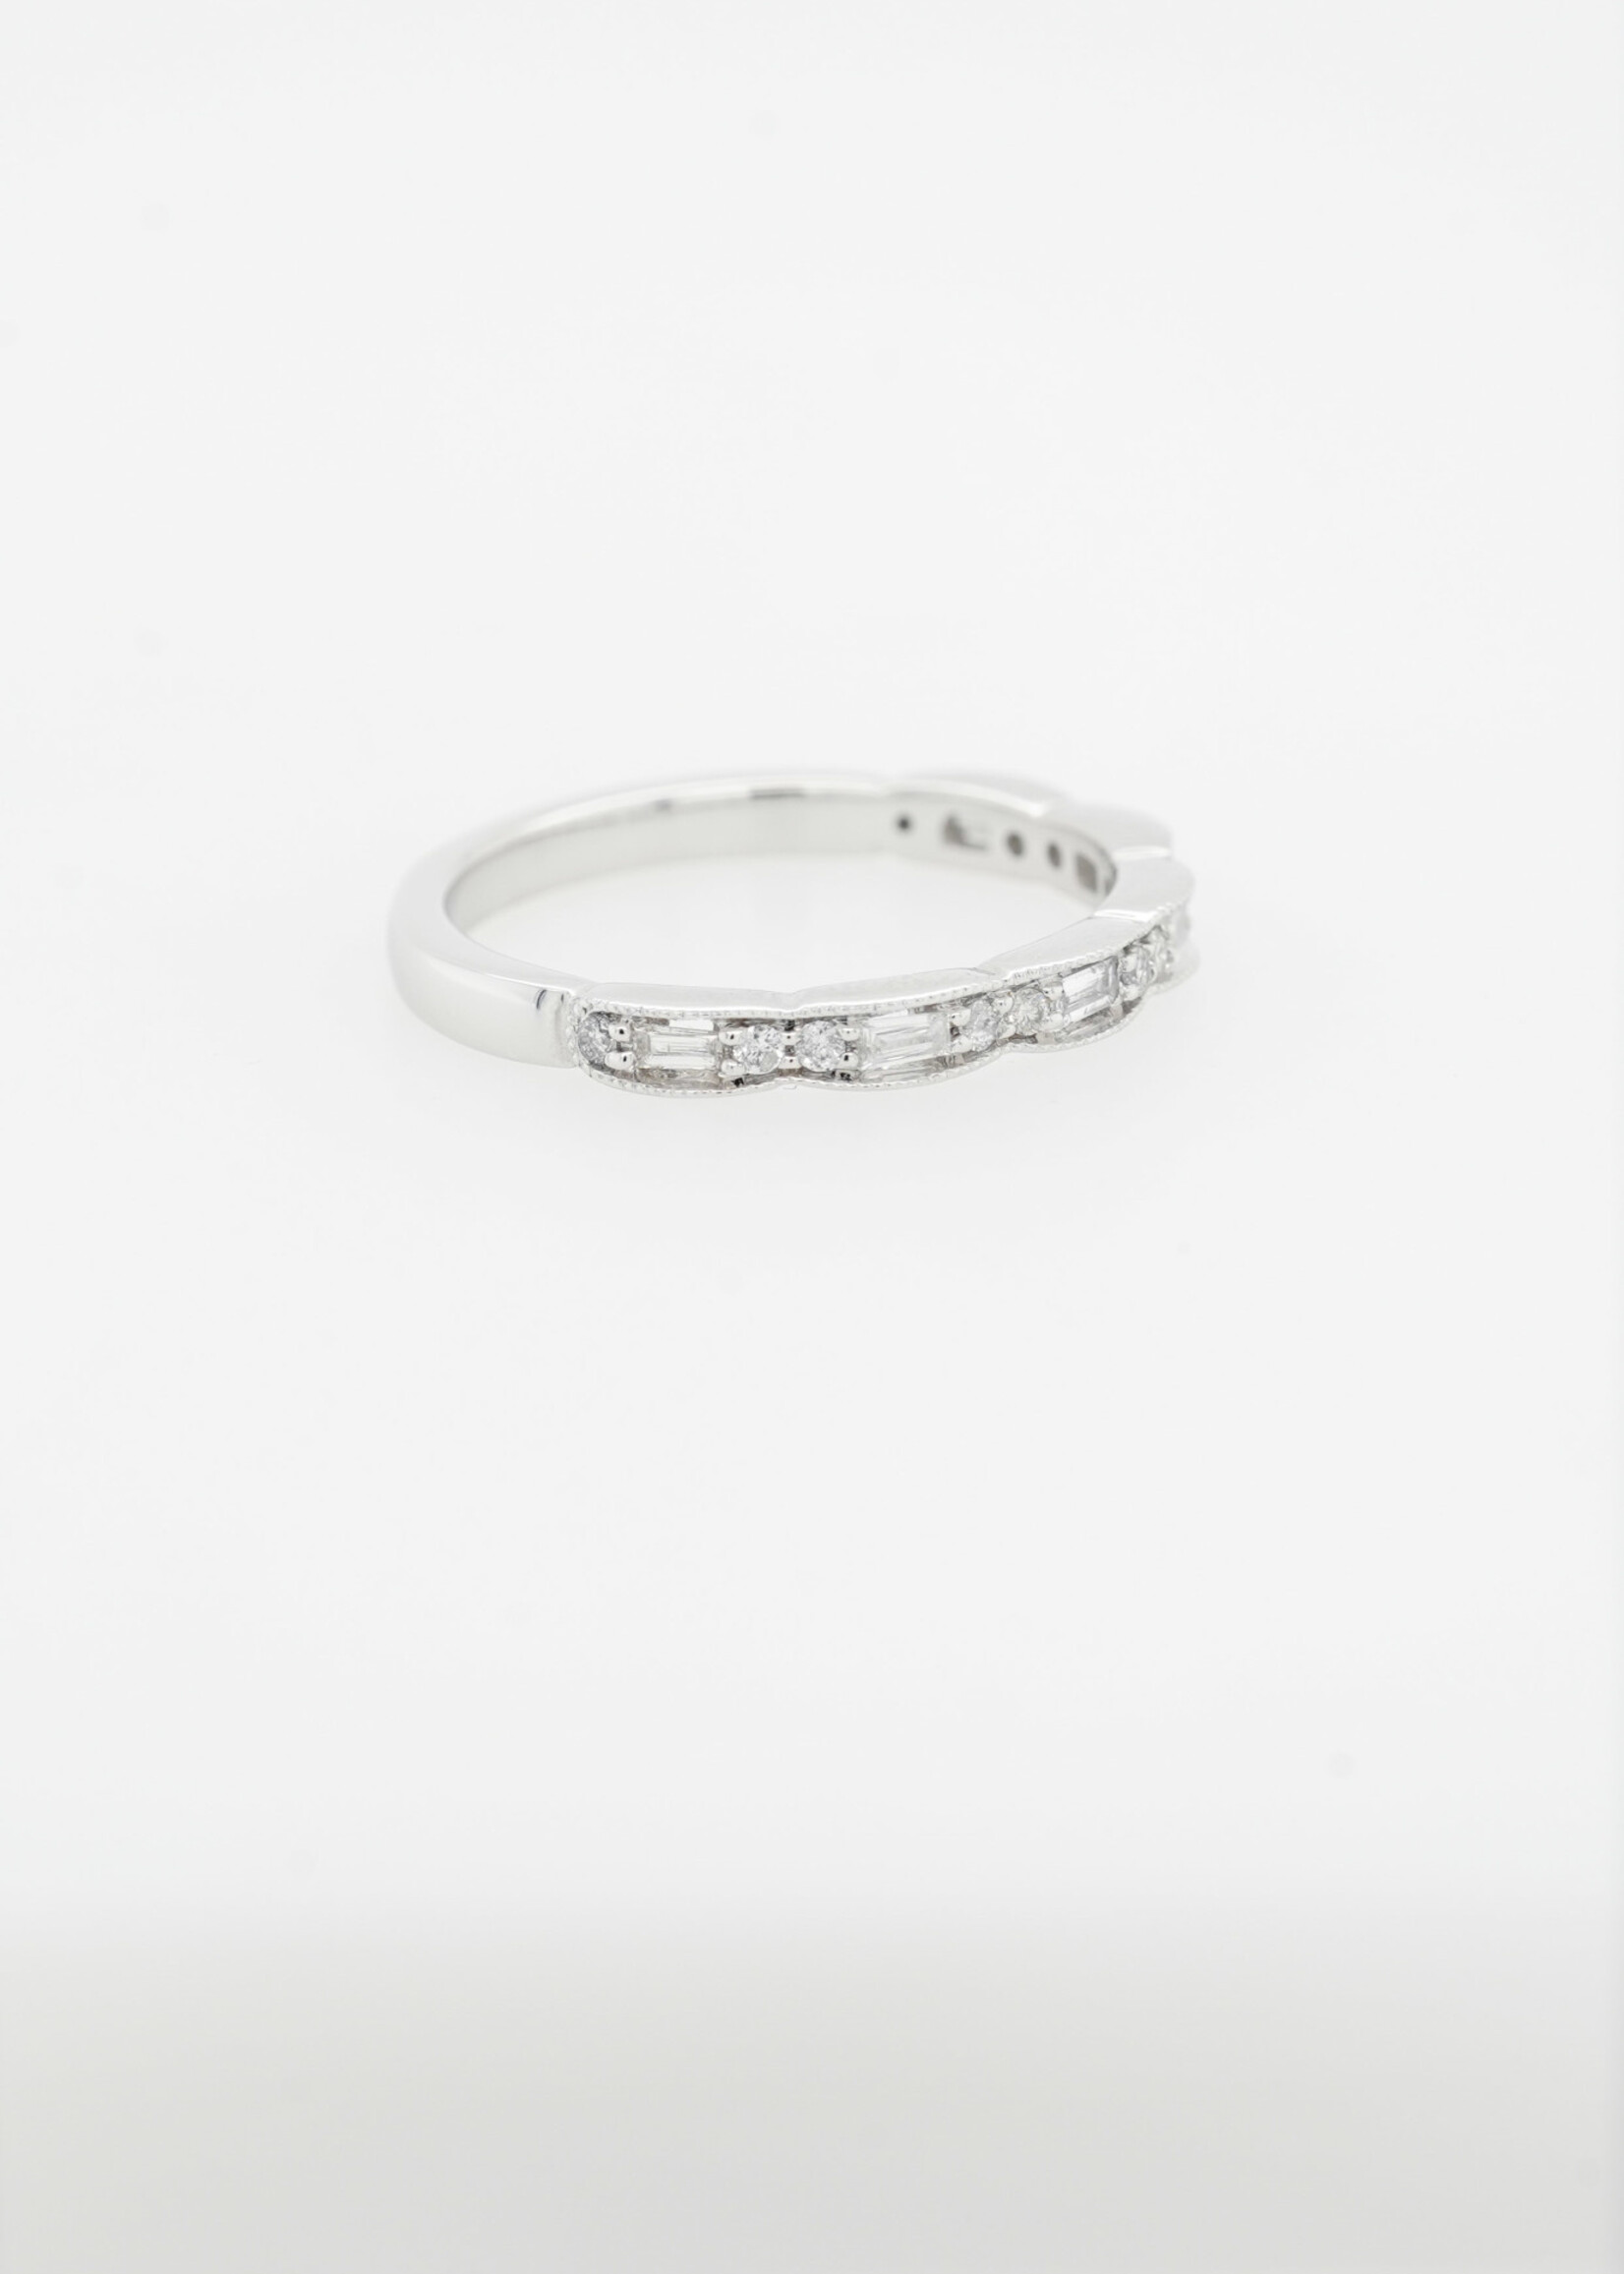 14KW 2.6g .28ctw Diamond Stackable Band (size 7)